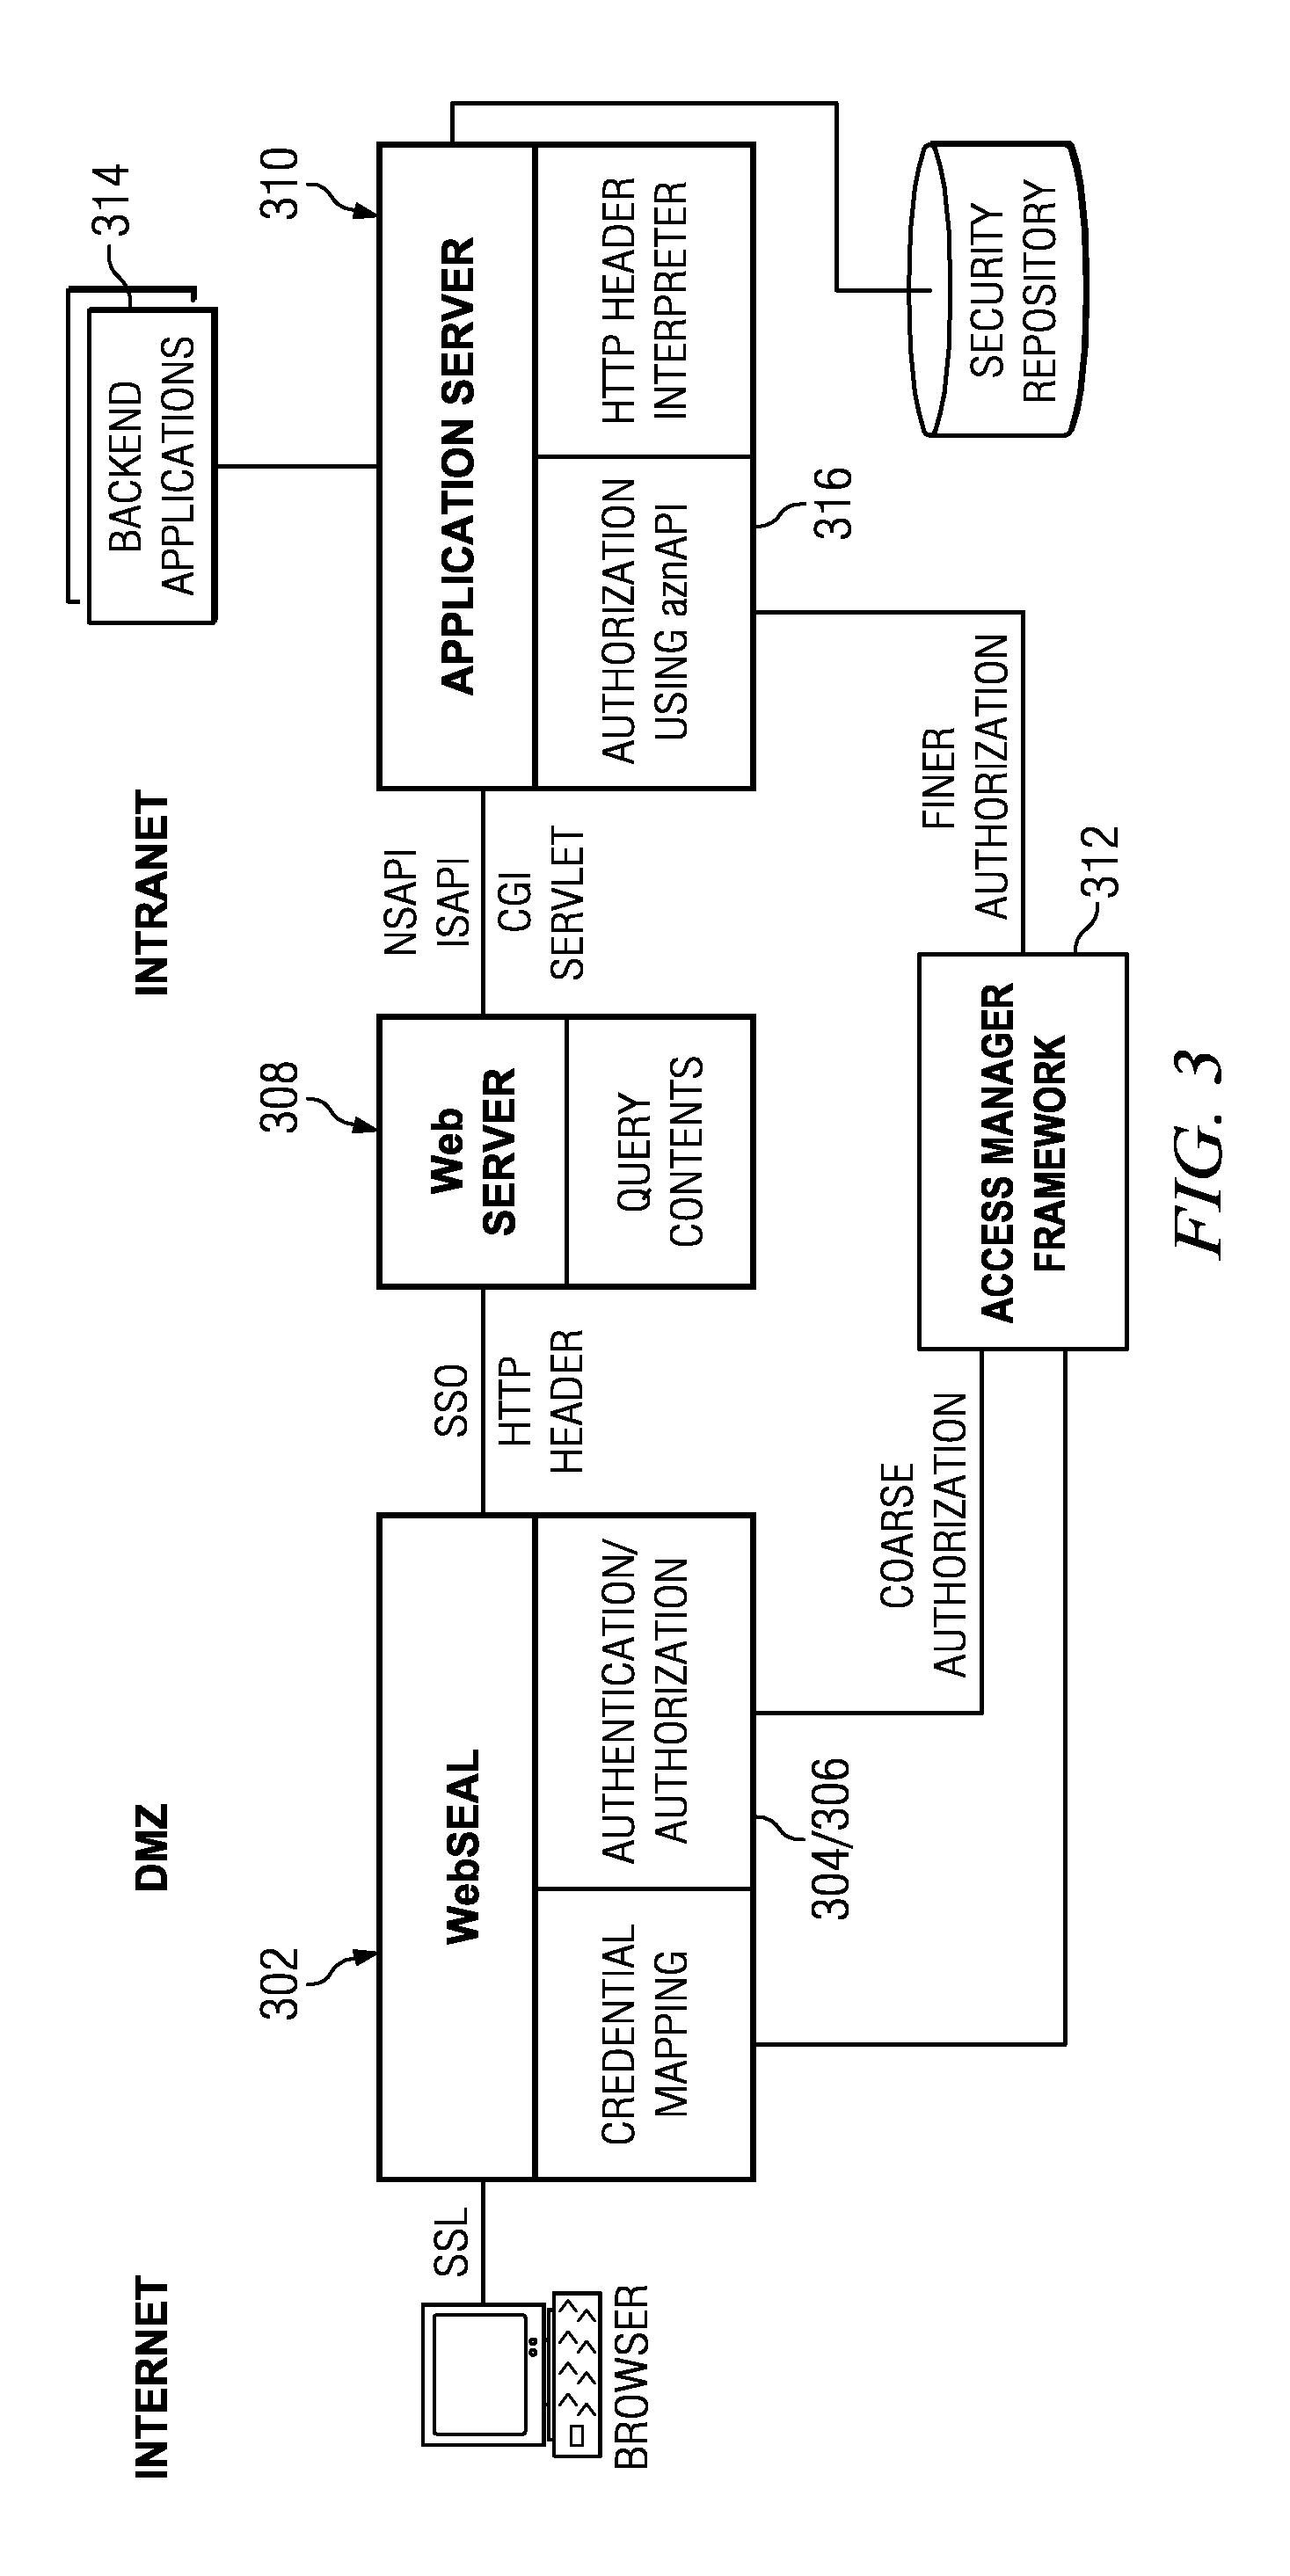 System and method for merging security constraints when using security annotations